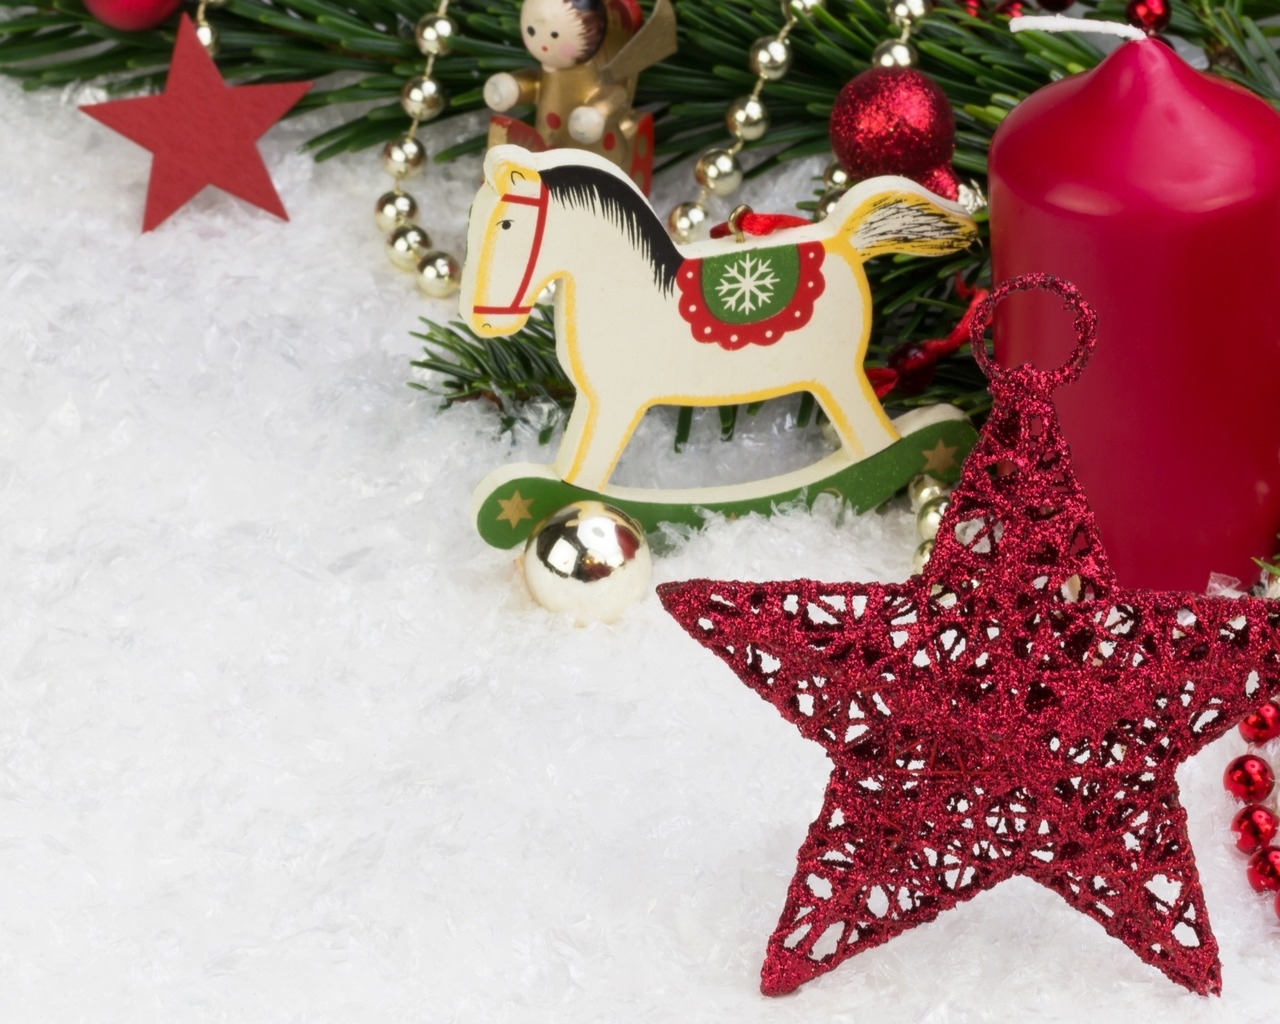 2014 Small Christmas Ornaments for 1280 x 1024 resolution